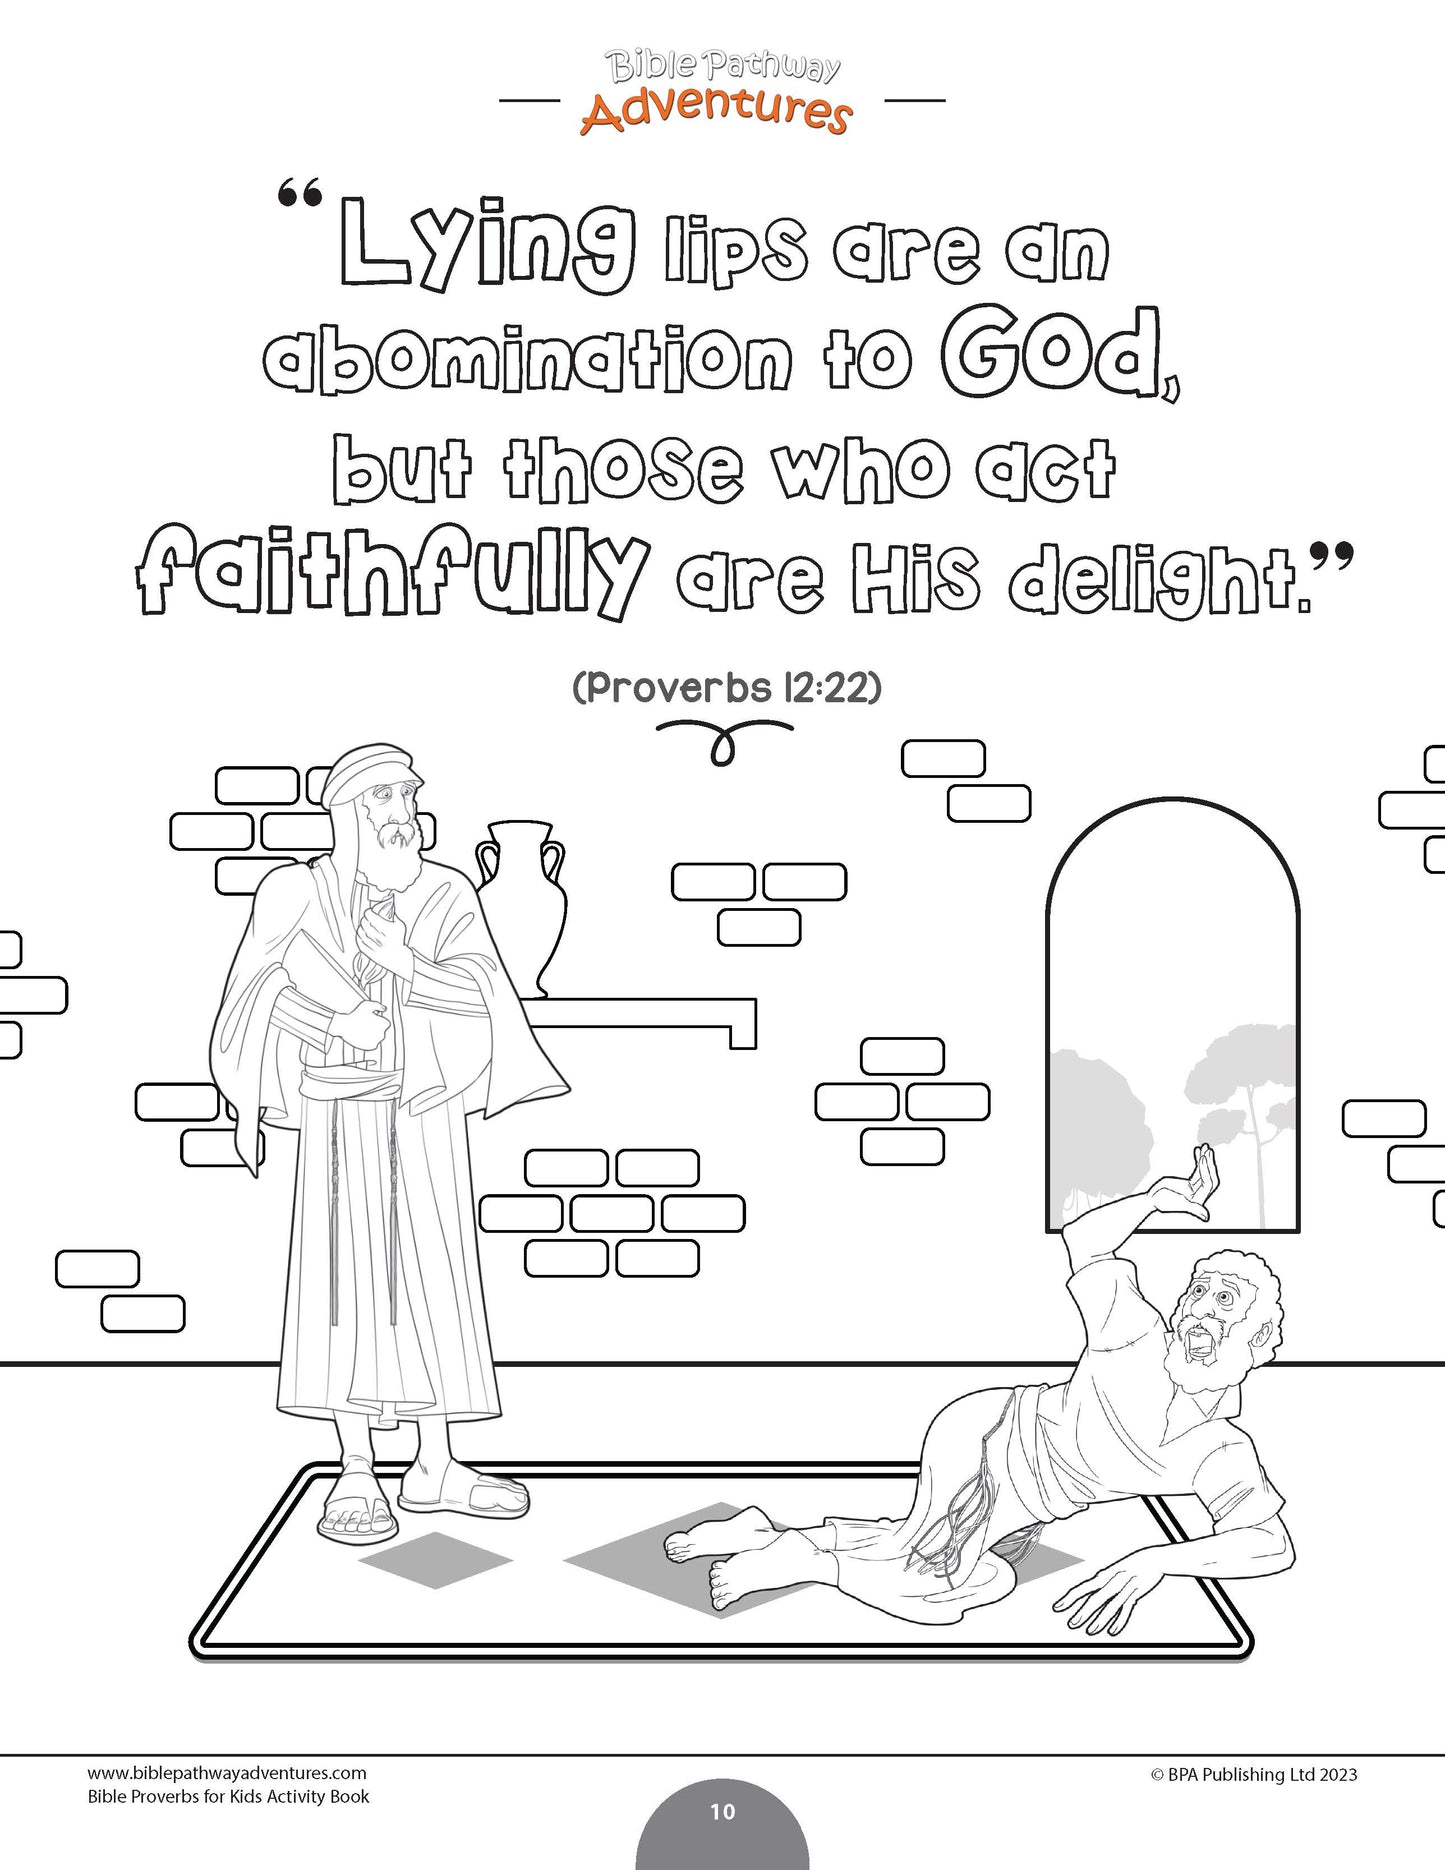 Honesty: Bible Activity Book for Kids (PDF)